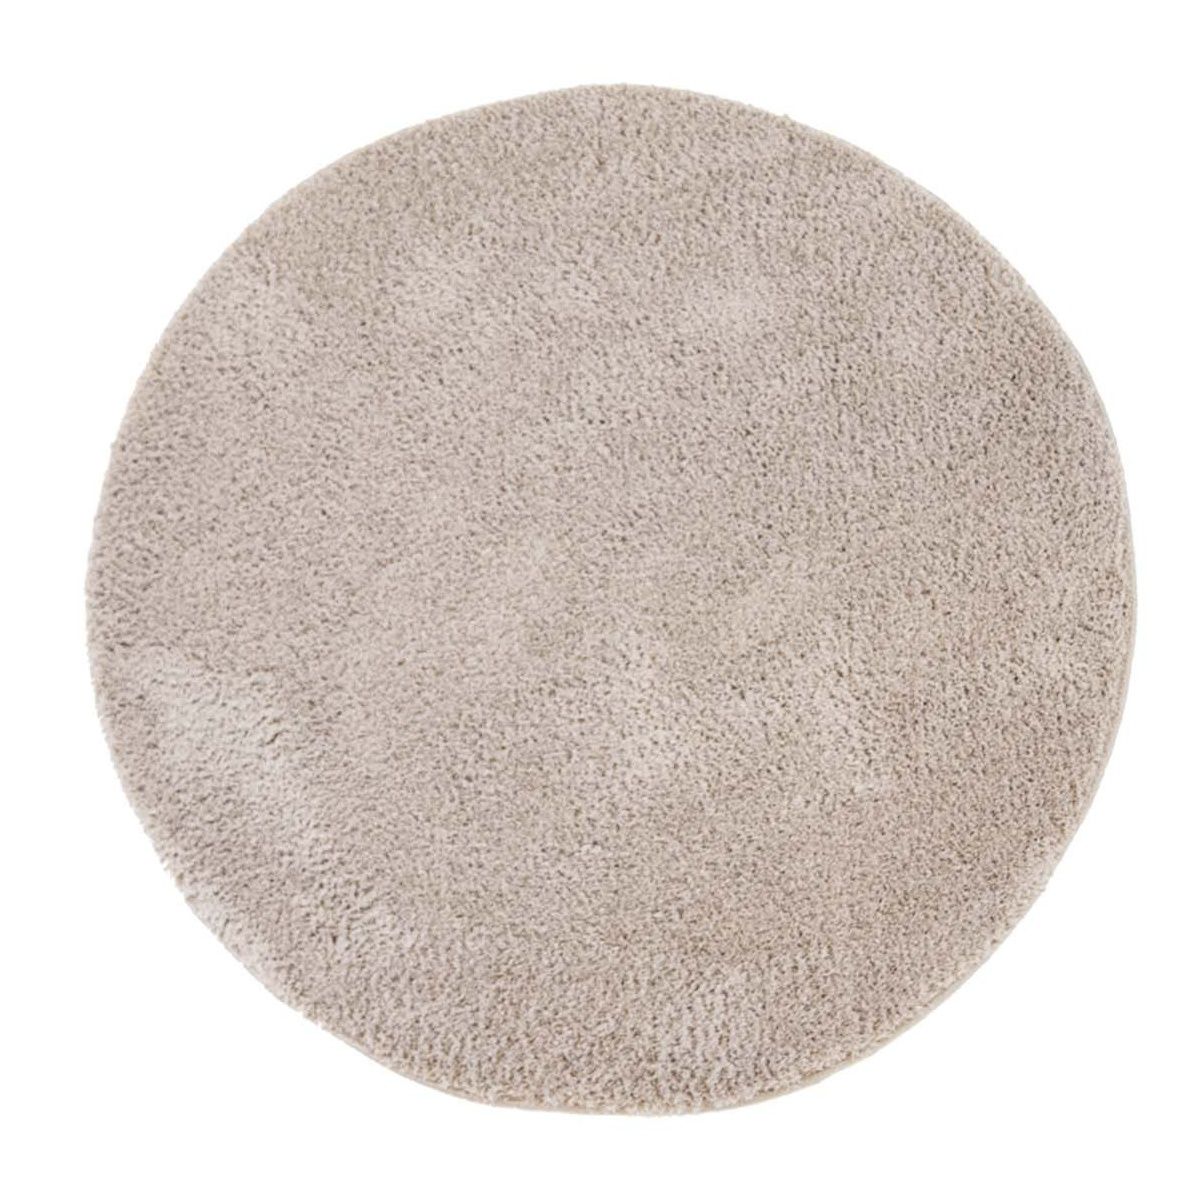 Buy Carpets And Rugs Online I Best Carpets Online I Rugs Store Uk I  Trendcarpet Pertaining To Beige Round Rugs (View 4 of 15)